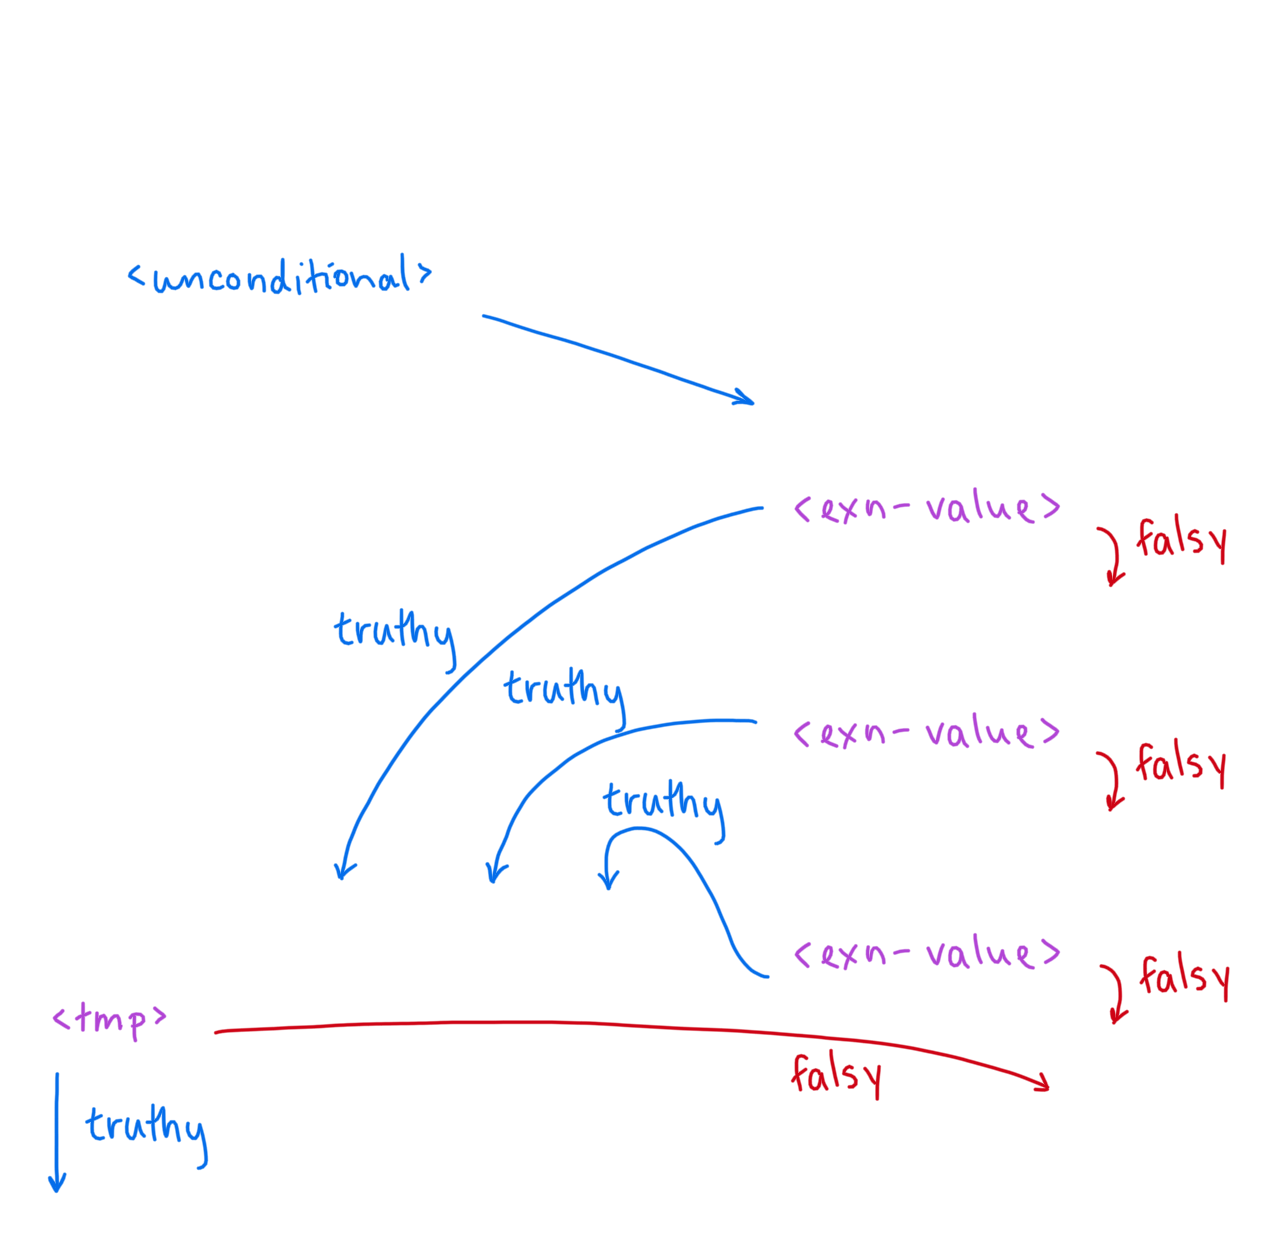 A diagram depicting the implementation described in the above commit